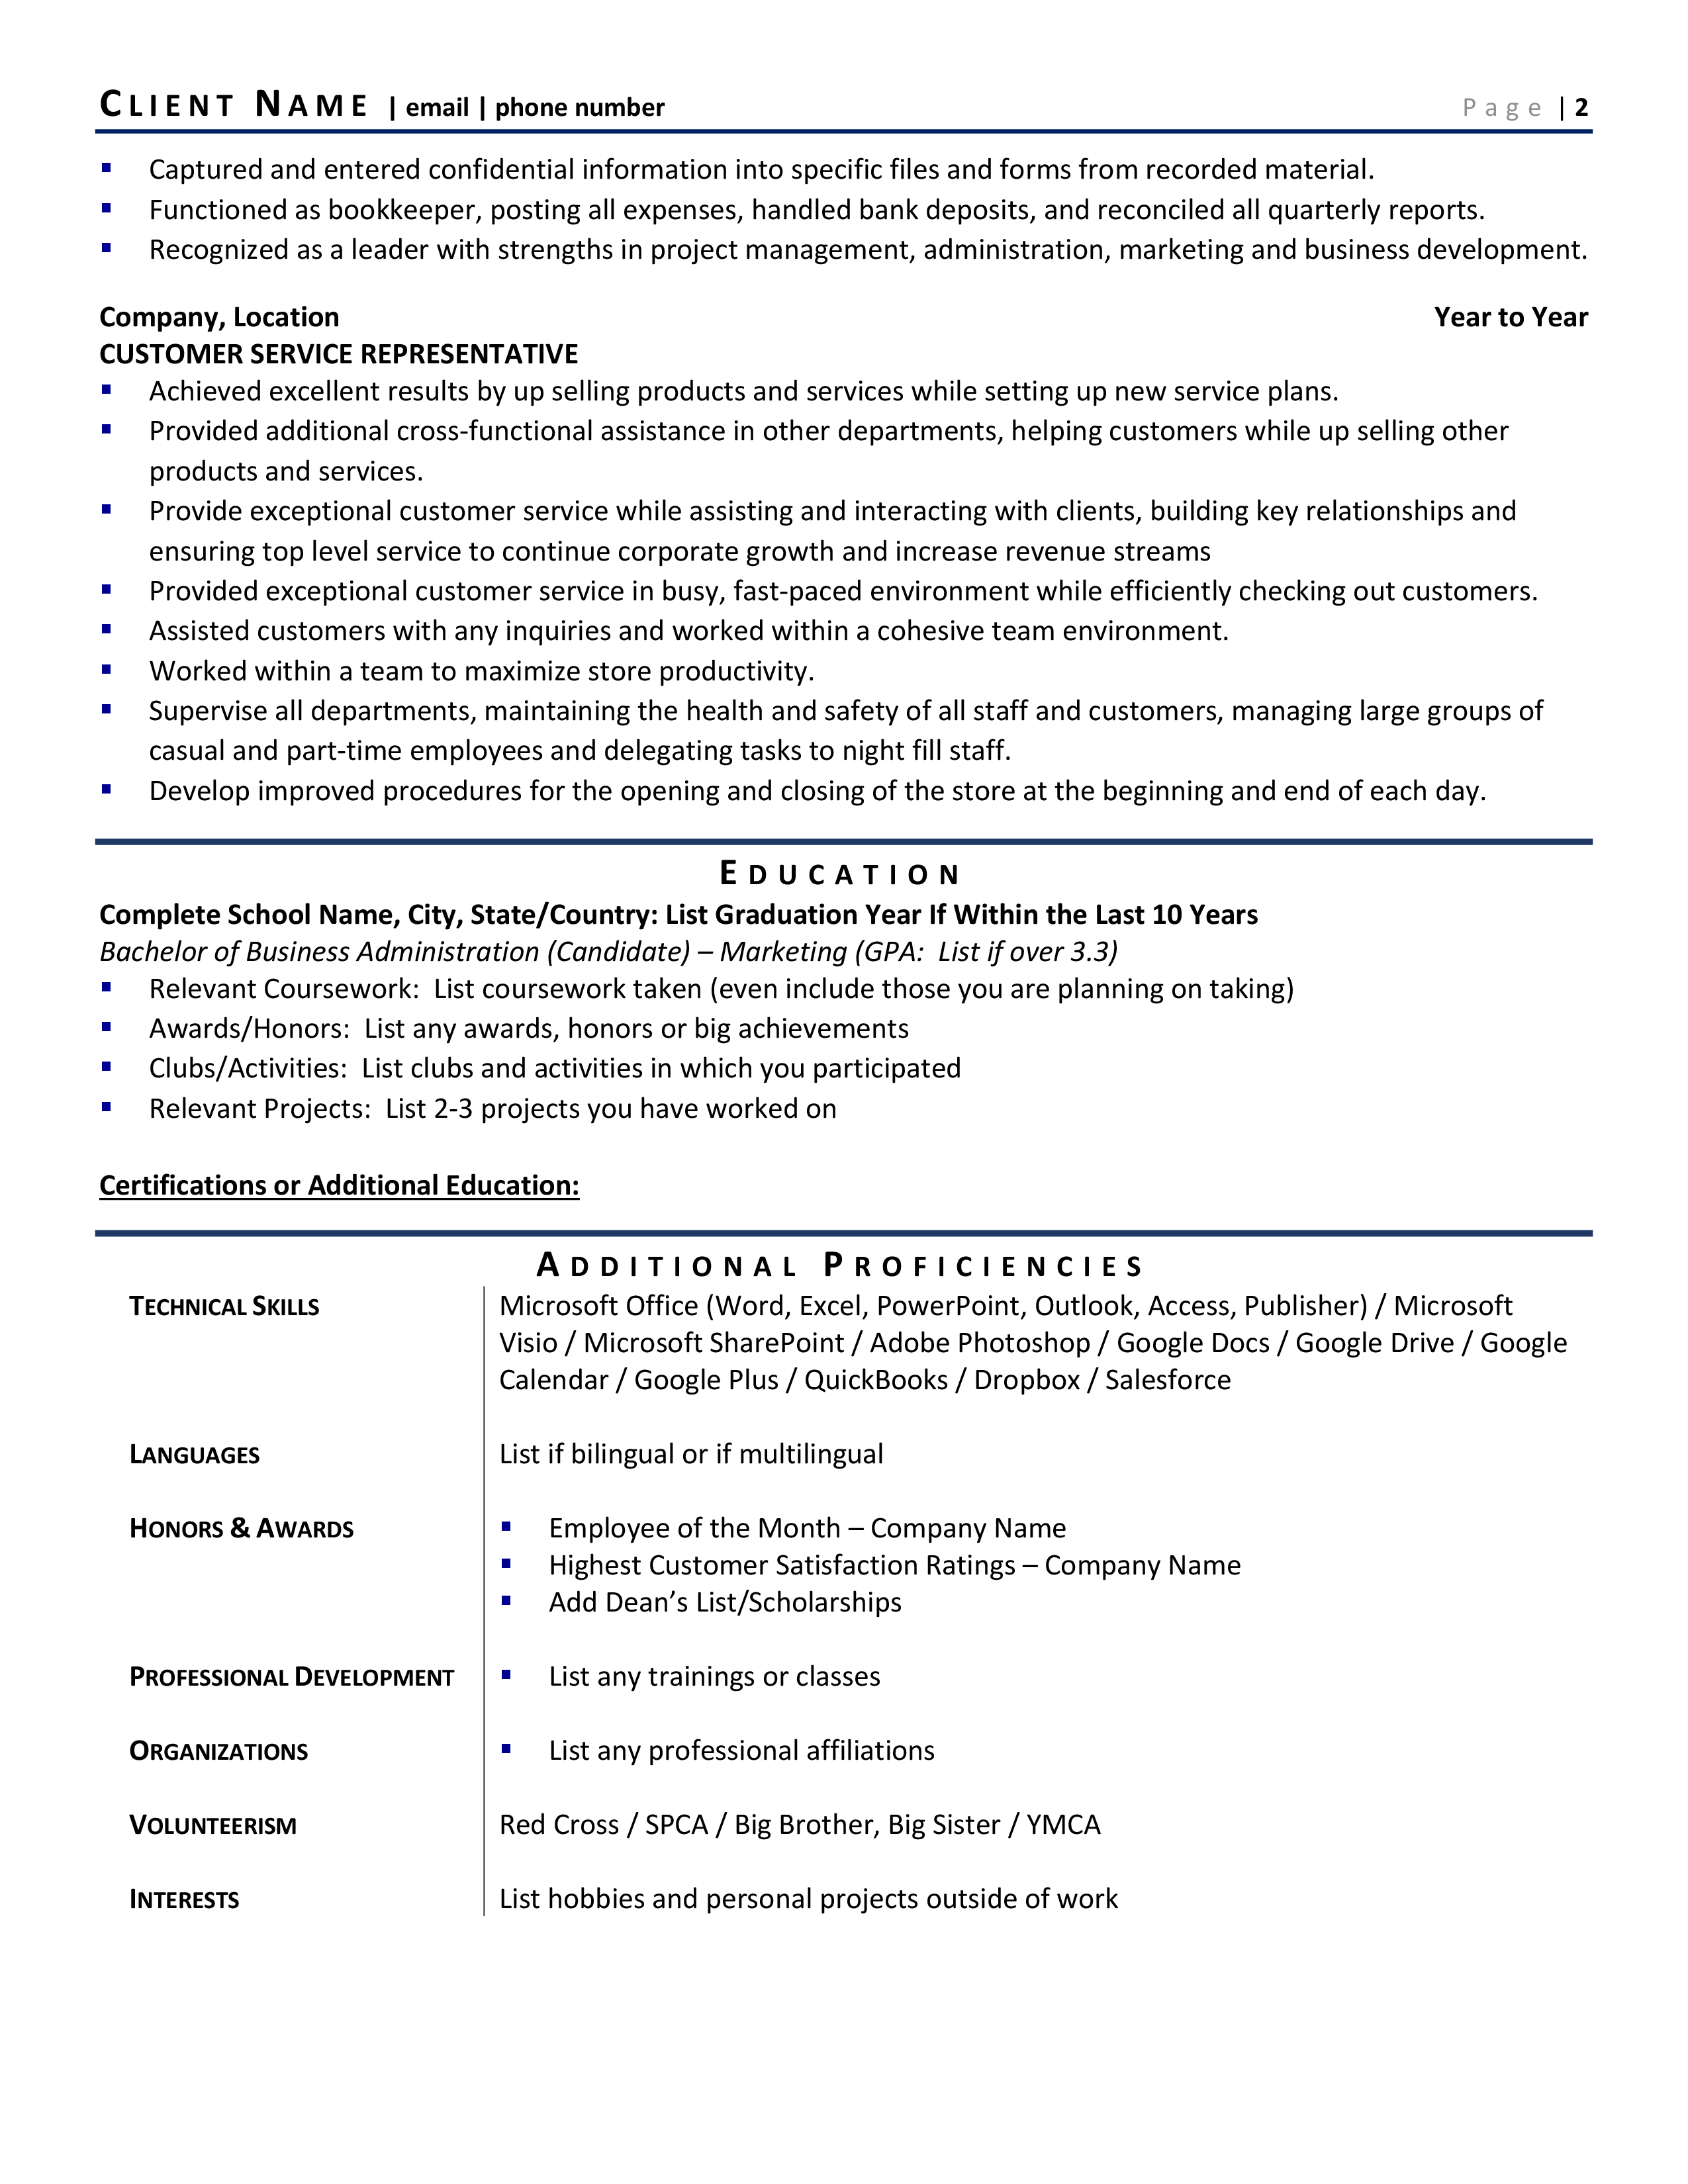 simple resume format for army